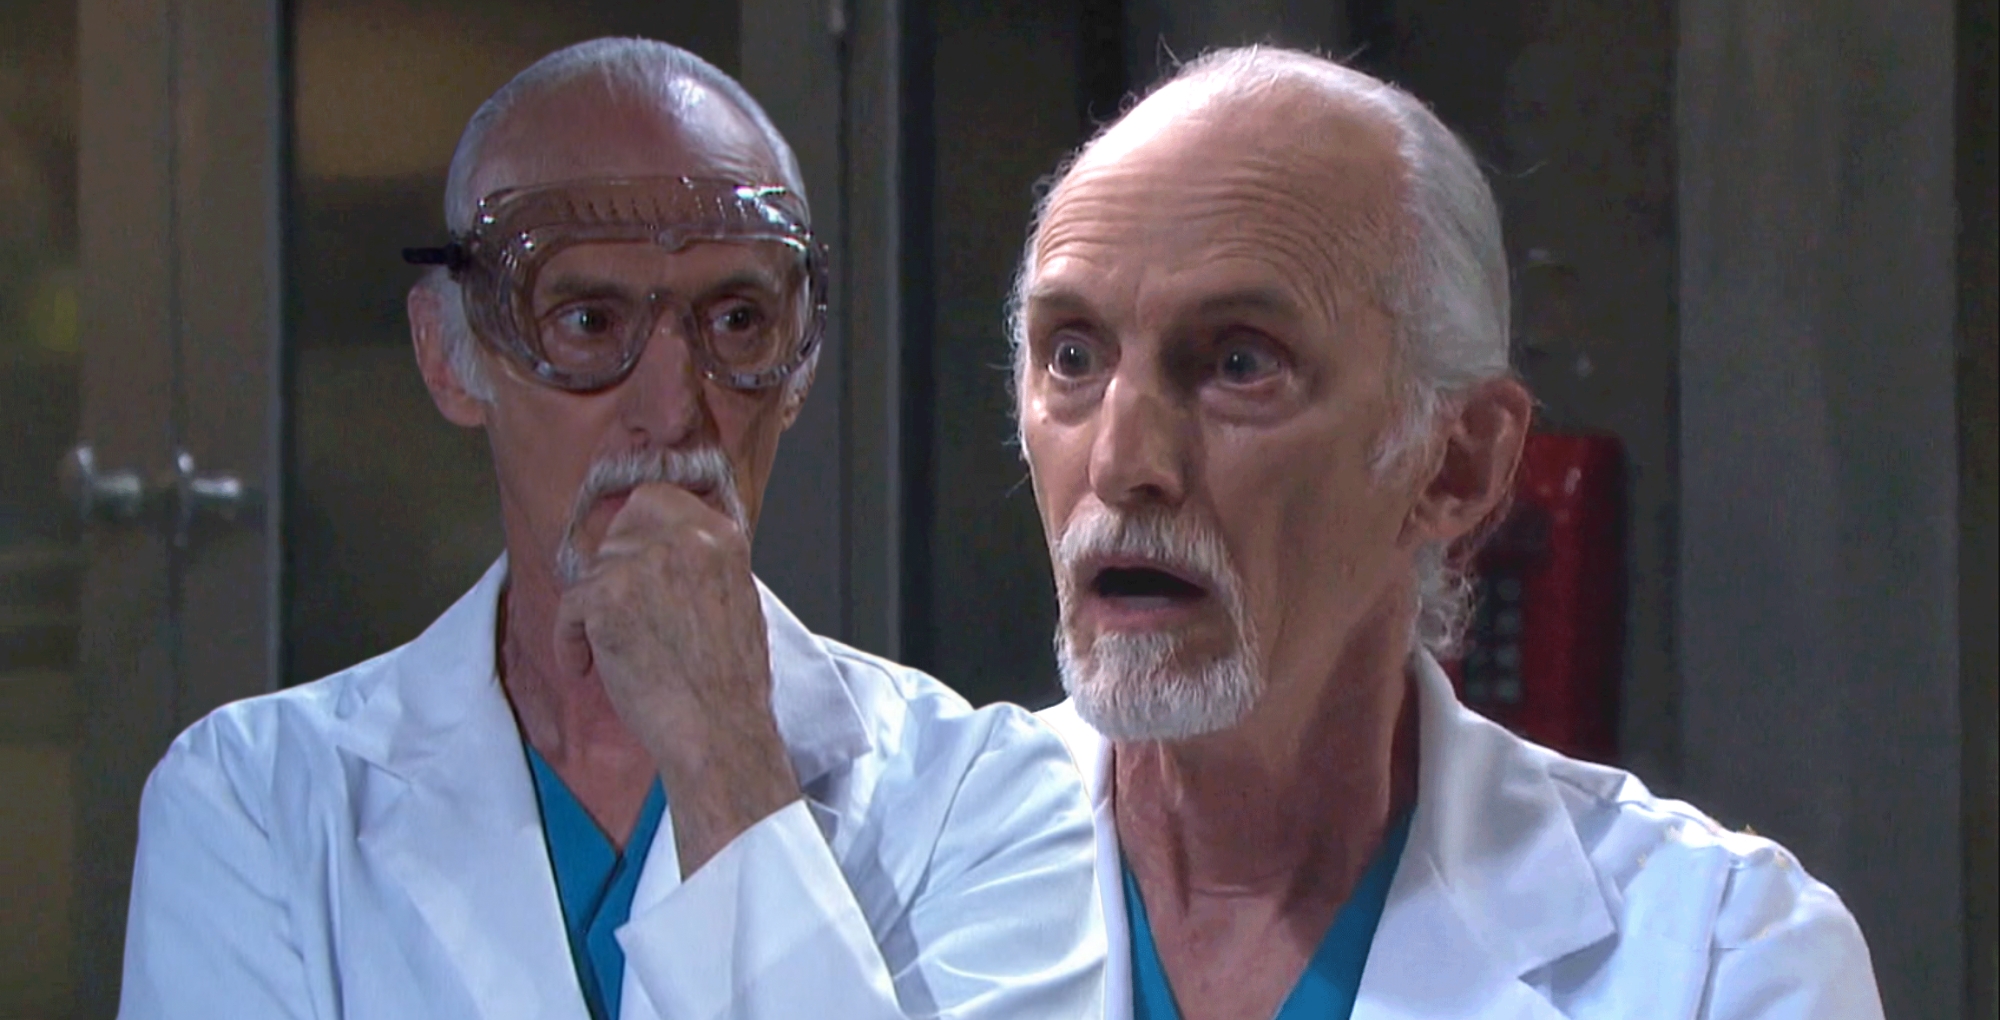 days of our lives rolf in two images, curious and indignant